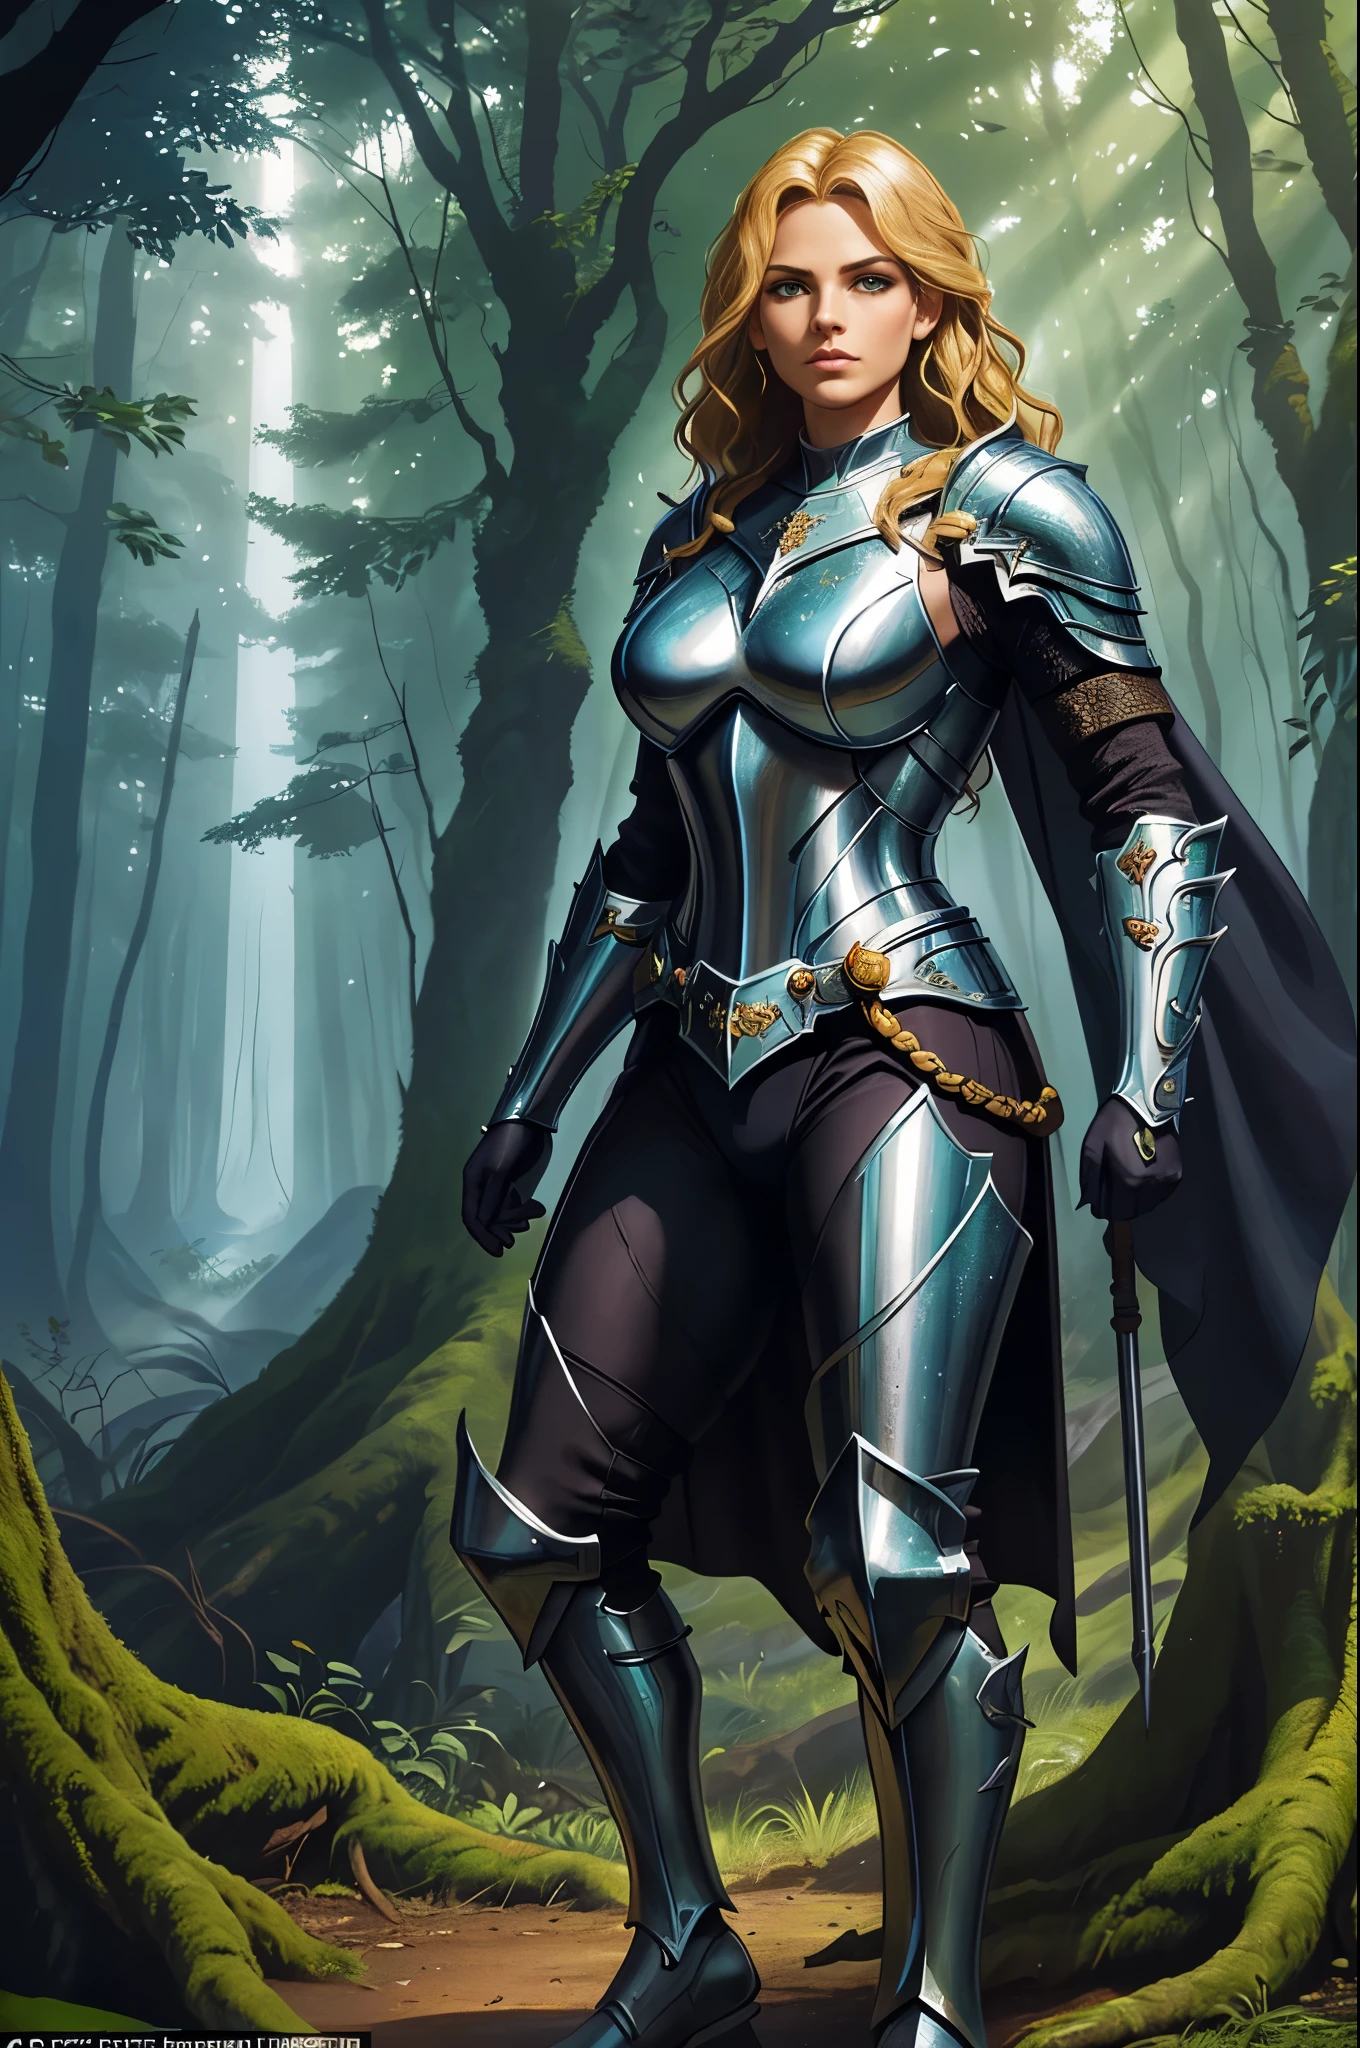 (lithe, athletic, strong, powerful:1.1), (beautiful, stunning, gorgeous:1.1), (blonde, golden-haired:1.1) knight woman with (well-defined, sculpted, toned:1.1) muscles, (sharp, piercing:1.1) eyes and a (determined, confident:1.1) expression. She wears a suit of (shiny, polished, reflective:1.1) armor, adorned with intricate engravings and embellishments. Her short hair is (wavy:1.1) and falls gracefully around her face. She carries a (gleaming, decorated:1.1) sword in one hand, and a (sturdy, formidable:1.1) shield in the other, both reflecting the light with a (radiant, dazzling:1.1) glow. The knight stands in a (majestic, grand:1.1) pose, exuding a sense of (nobility, gracefulness:1.1) and (power, strength:1.1).

The scene takes place in a (mysterious, enchanted:1.1) forest, with (sunlight, rays of light:1.1) piercing through the canopy above, creating a beautiful (dappled, ethereal:1.1) effect on the ground. The trees surrounding the knight are tall and ancient, their trunks covered in (twisted, gnarled:1.1) roots and (lush, vibrant:1.1) moss. The air is filled with the scent of (wildflowers, pine:1.1) and the sounds of (rustling leaves, chirping birds:1.1). Wisps of (magical, shimmering:1.1) energy float in the air, adding an element of (mystery, enchantment:1.1) to the scene.

The knight's armor reflects the colors of nature, with hints of (emerald green, golden yellow:1.1) and (deep blue, rich purple:1.1). Her eyes sparkle with a (bright, vibrant:1.1) blue, mirroring the sky above. The overall color tone of the scene is (warm, earthy:1.1) and (saturated, vivid:1.1), enhancing the sense of (adventure, excitement:1.1) and (boldness, courage:1.1).

The lighting in the scene is (soft, diffused:1.1), with the sunlight filtering through the leaves creating subtle shadows and highlights on the knight's armor. The (gentle, warm:1.1) glow gives the scene a sense of (serenity, tranquility:1.1) and (magic, wonder:1.1).

This prompt aims to generate a high-quality, photorealistic image of a fierce and elegant blonde knight woman, surrounded by the enchanting beauty of a mystical forest. The attention to detail in the knight's appearance, armor, and the surrounding environment, along with the use of vibrant colors and magical lighting, will result in a visually striking and captivating artwork.